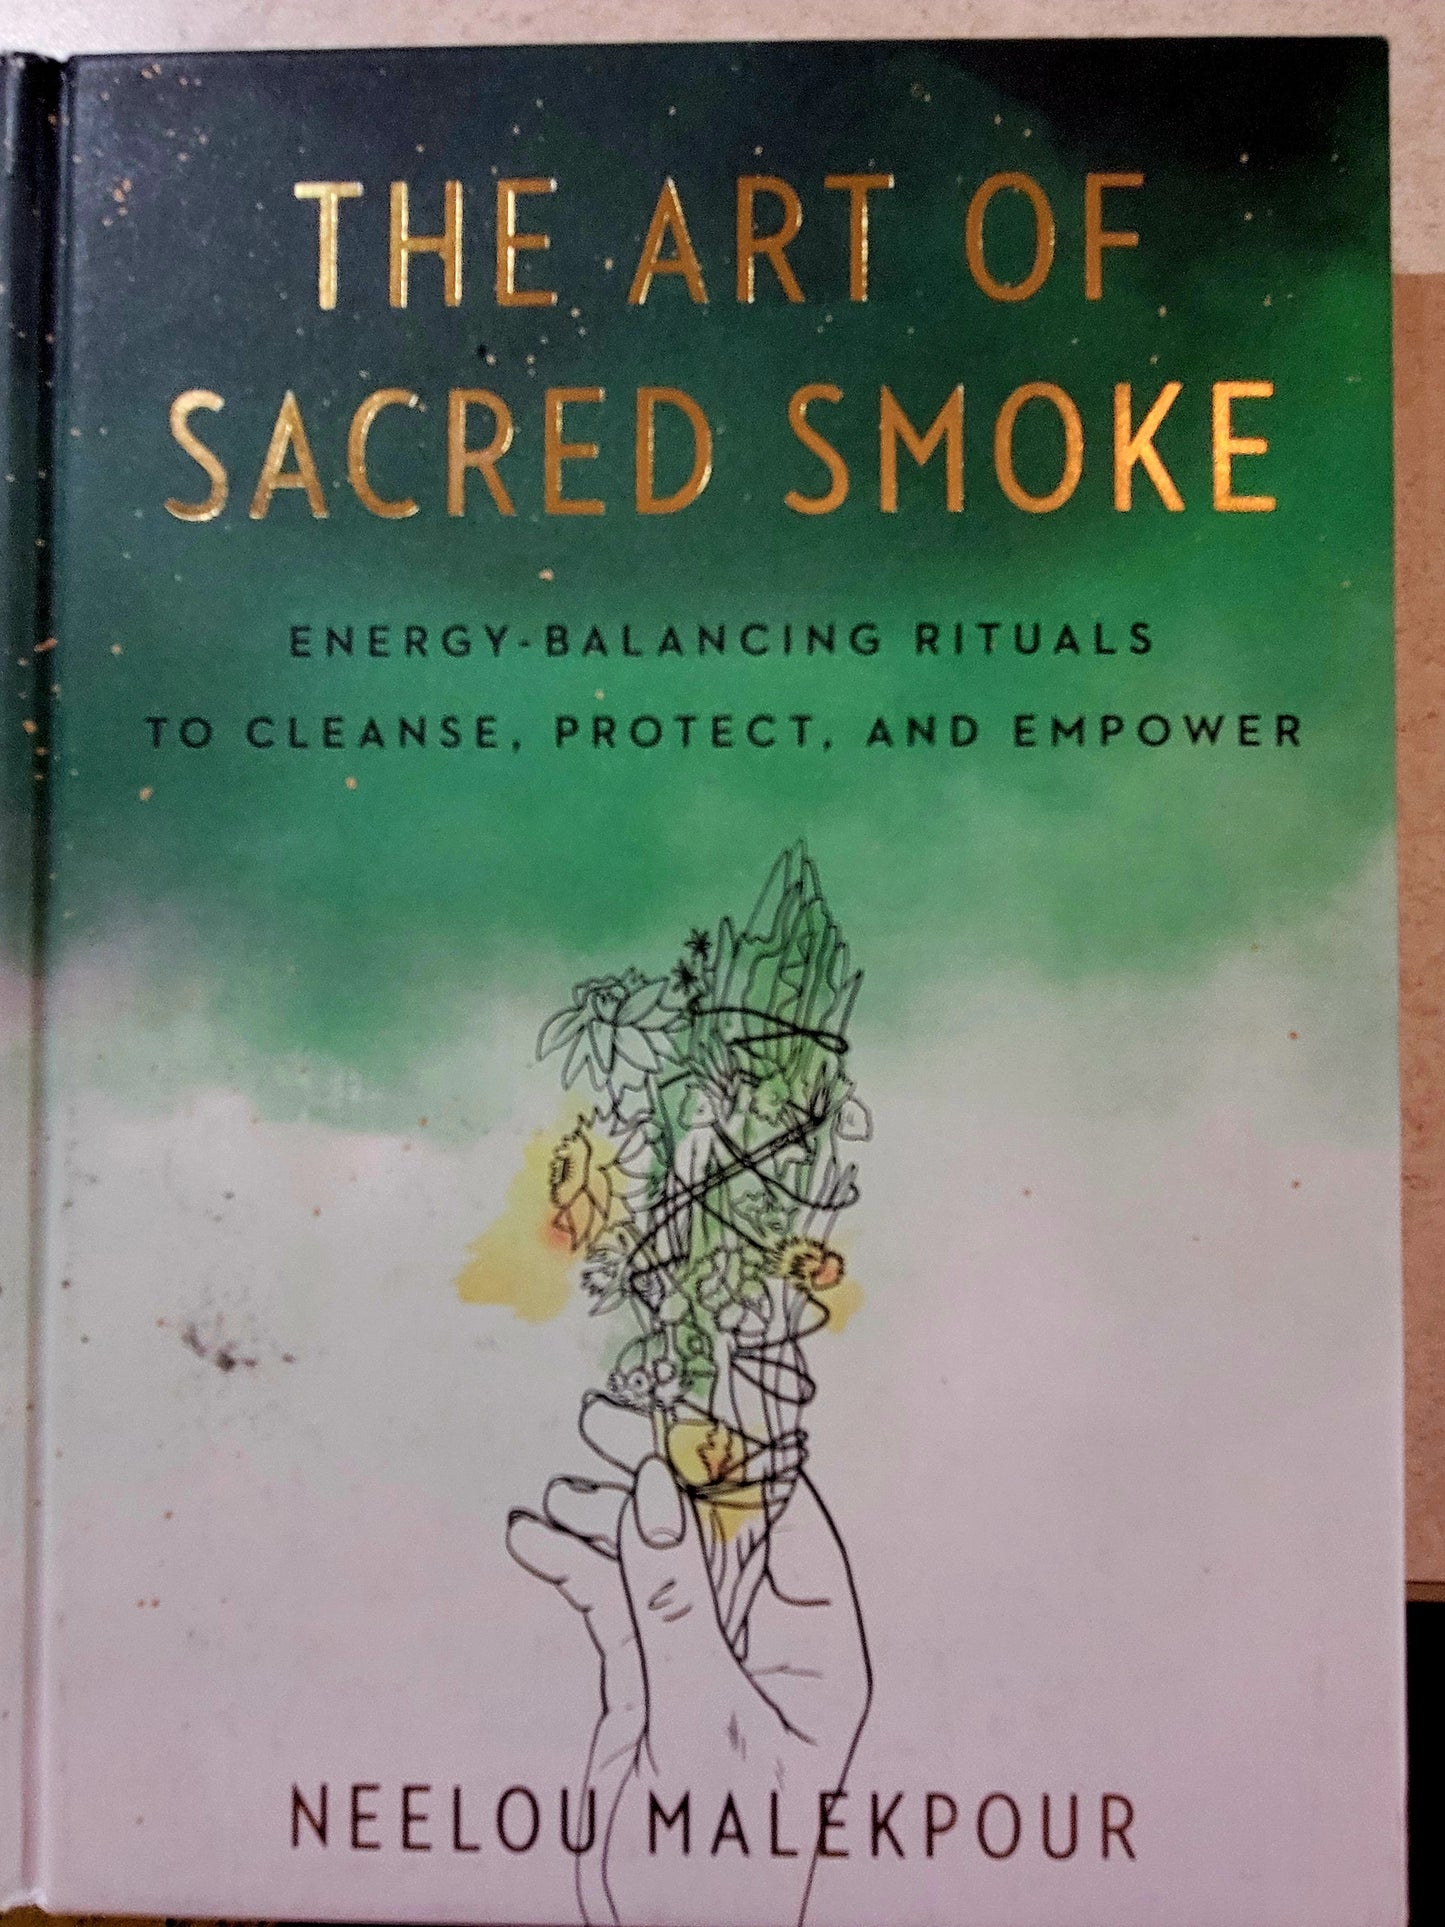 The Art of Sacred Smoke ENERGY-BALANCING RITUALS TO CLEANSE, PROTECT, AND EMPOWER-Louise Androlia